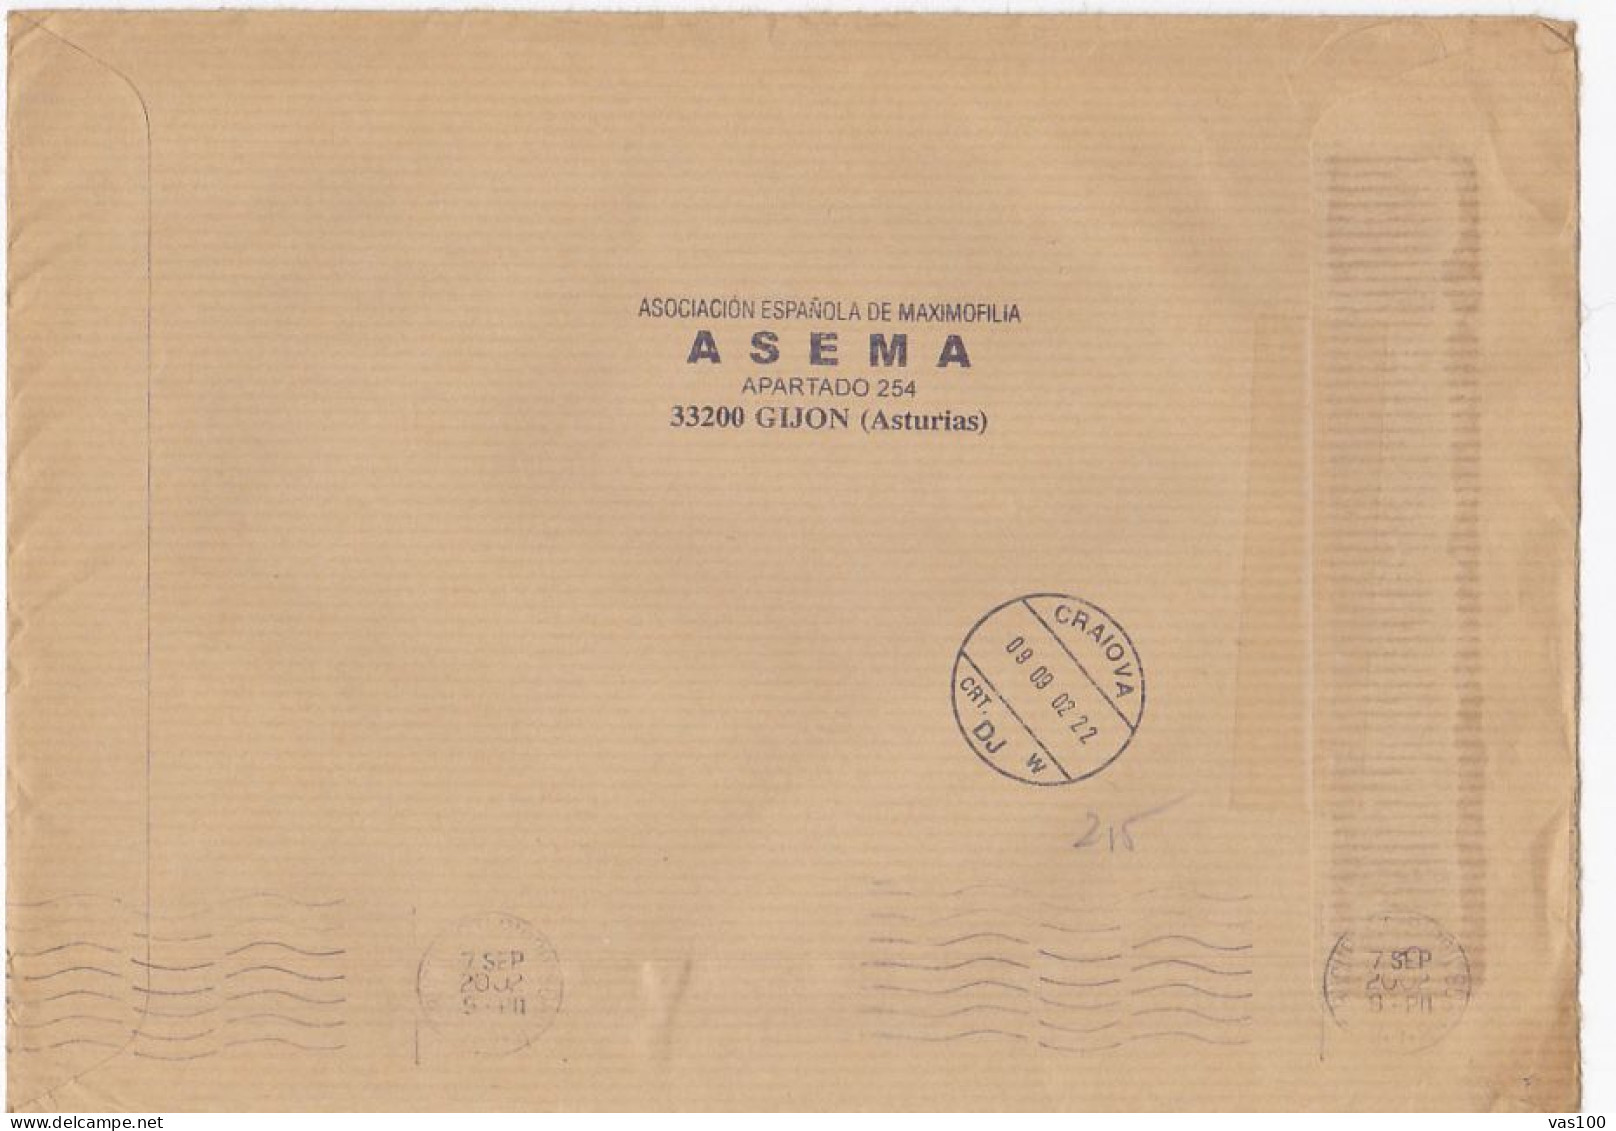 ORCHIDS, ZARAGOZA MILITARY ACADEMY, KING JUAN CARLOS, MOTORBIKE, STAMPS ON COVER, 2002, SPAIN - Briefe U. Dokumente